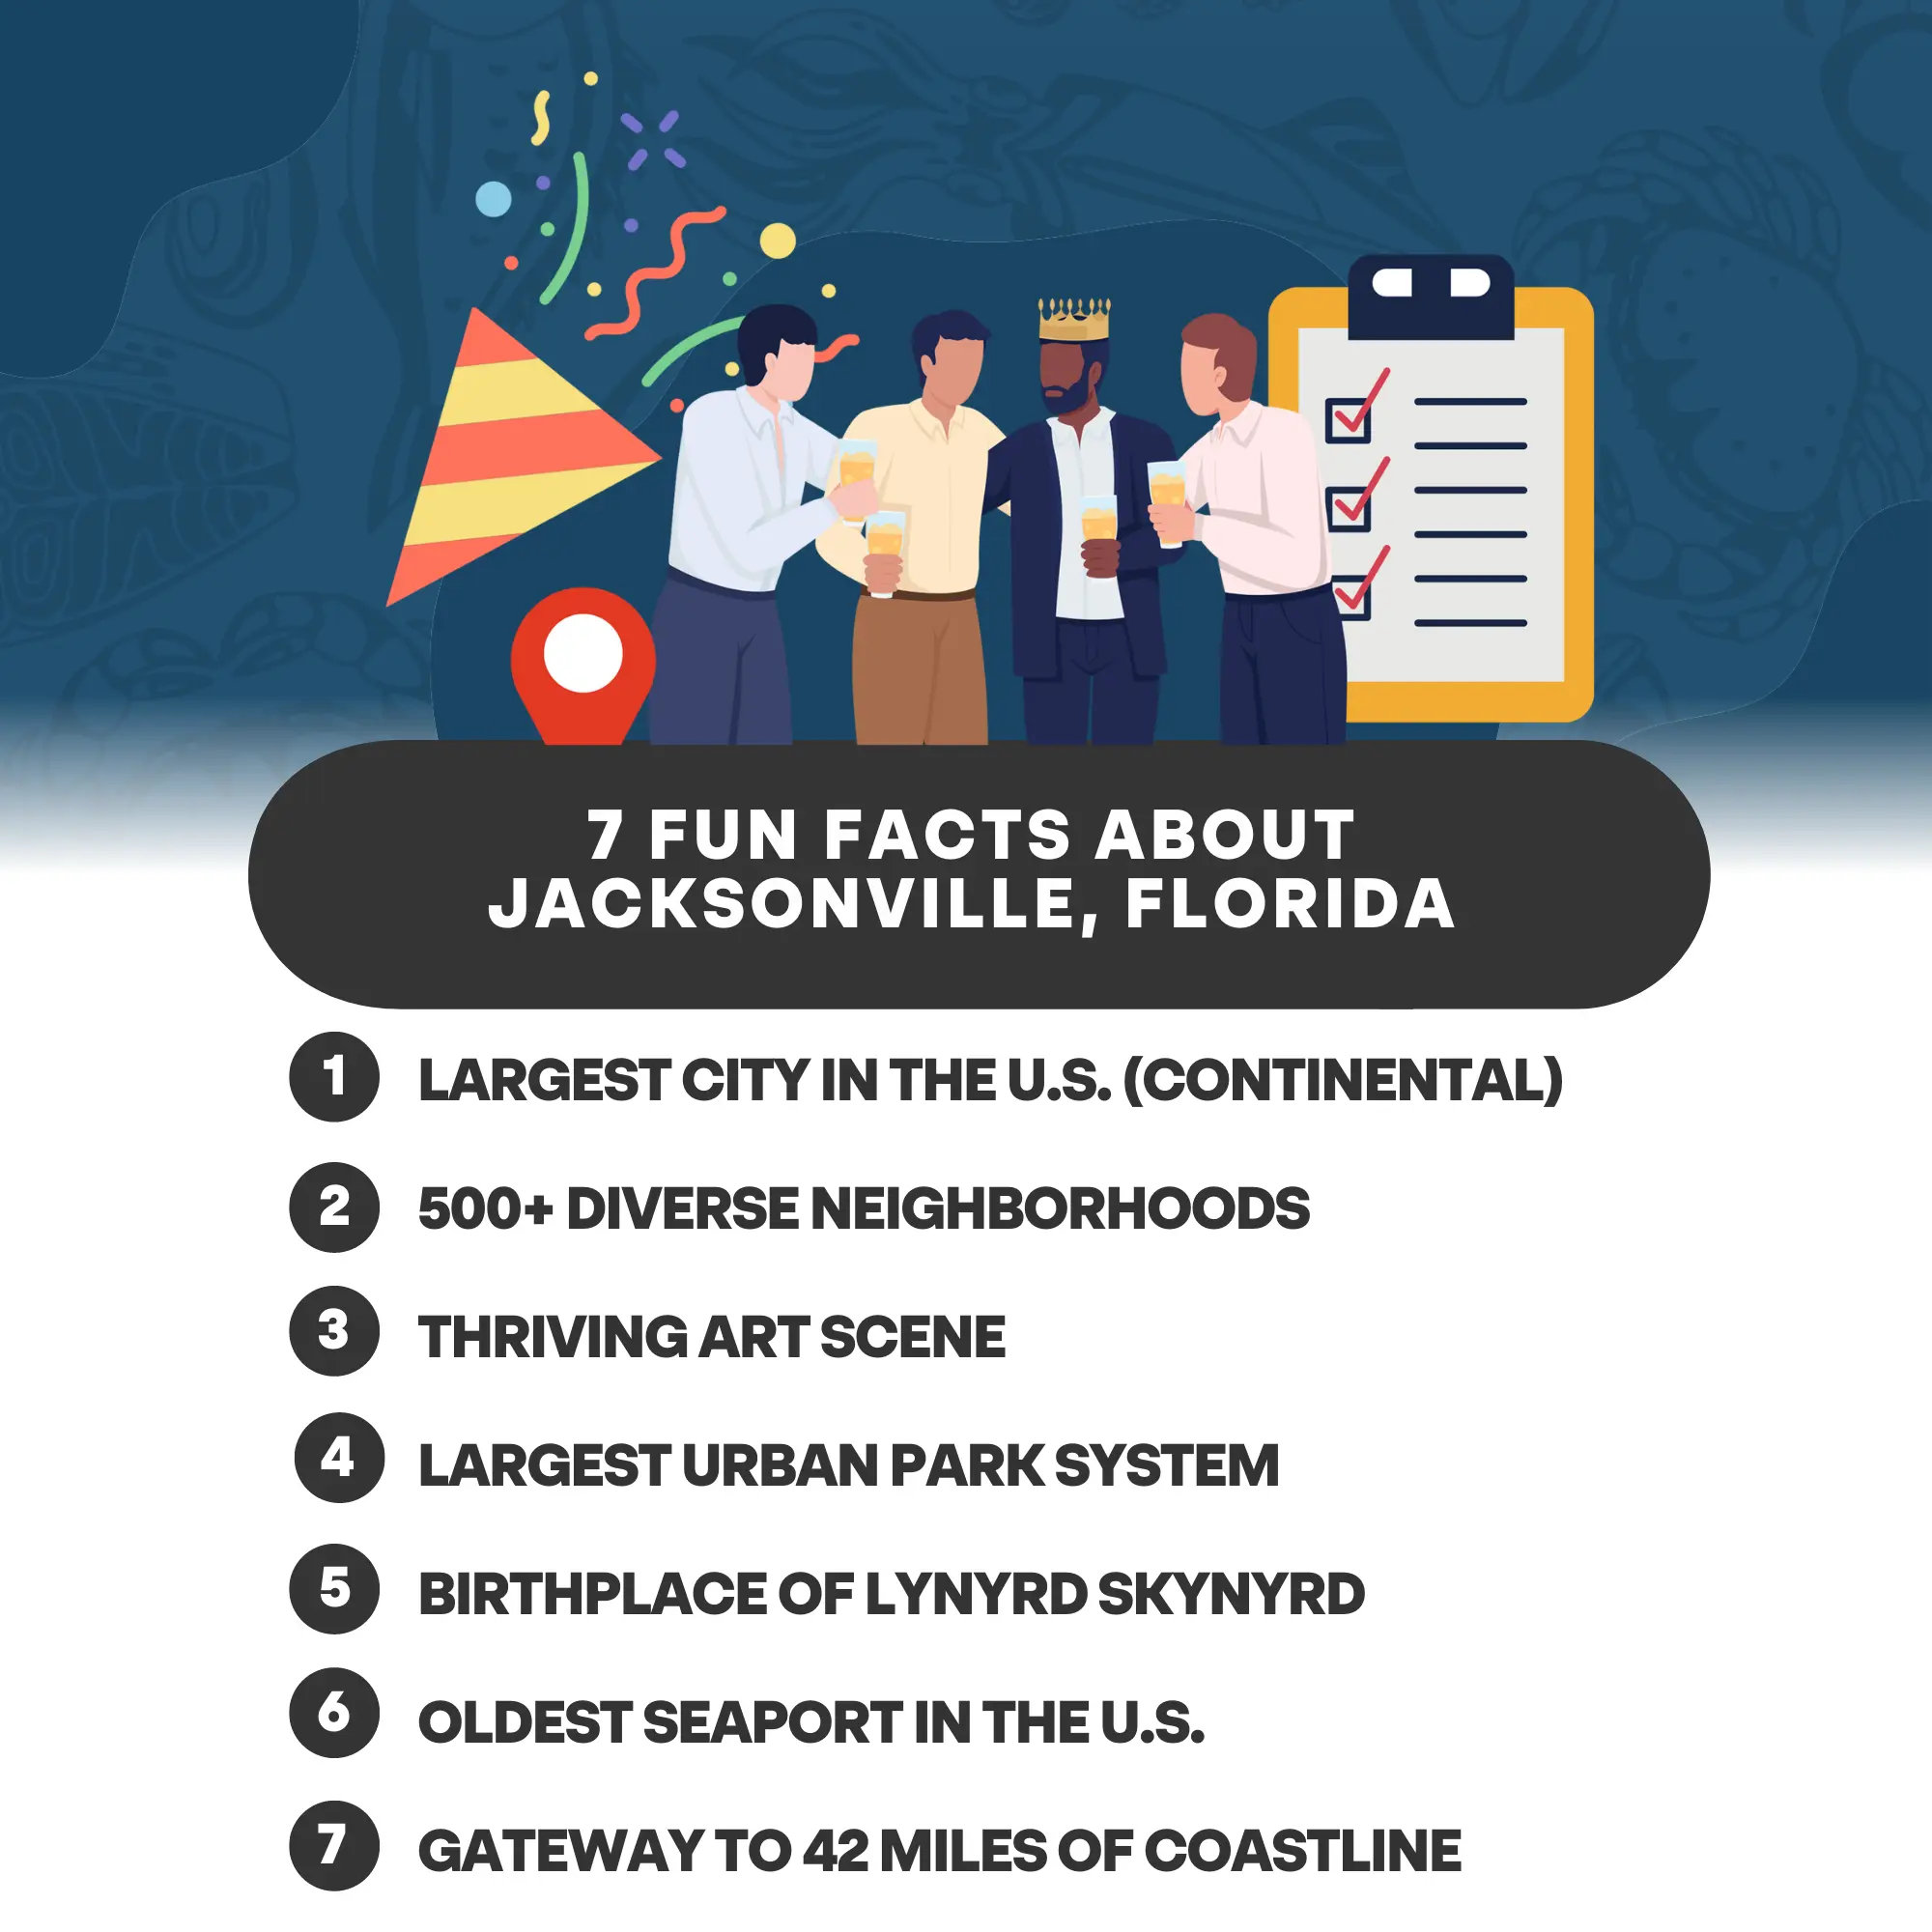 7 Fun Facts About Jacksonville, Florida